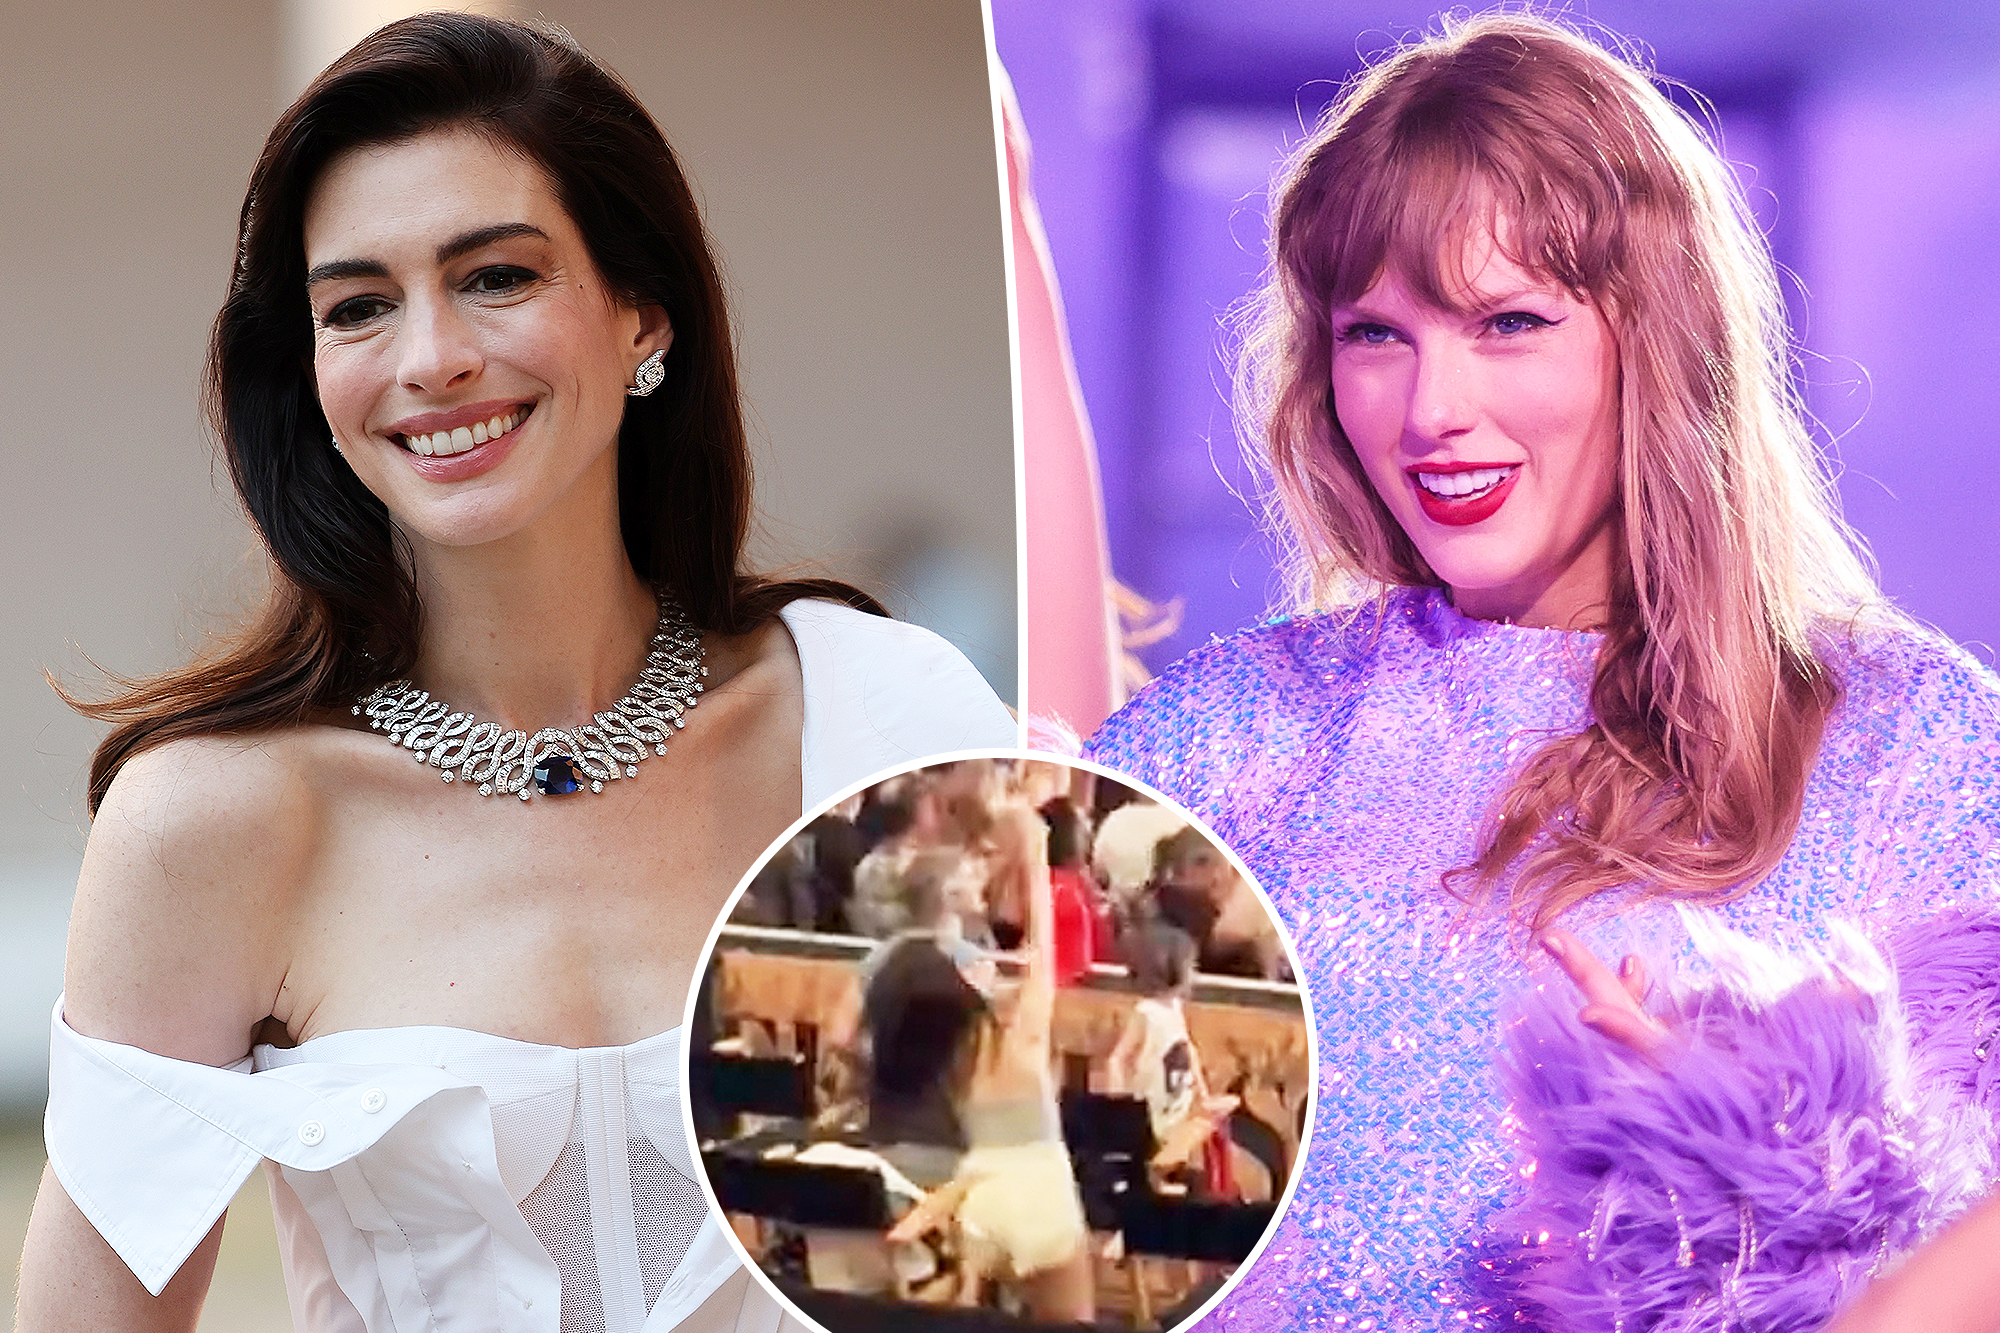 Anne Hathaway Lets Loose at Taylor Swift's Eras Tour in Germany - Watch Her Epic Dance Moves!